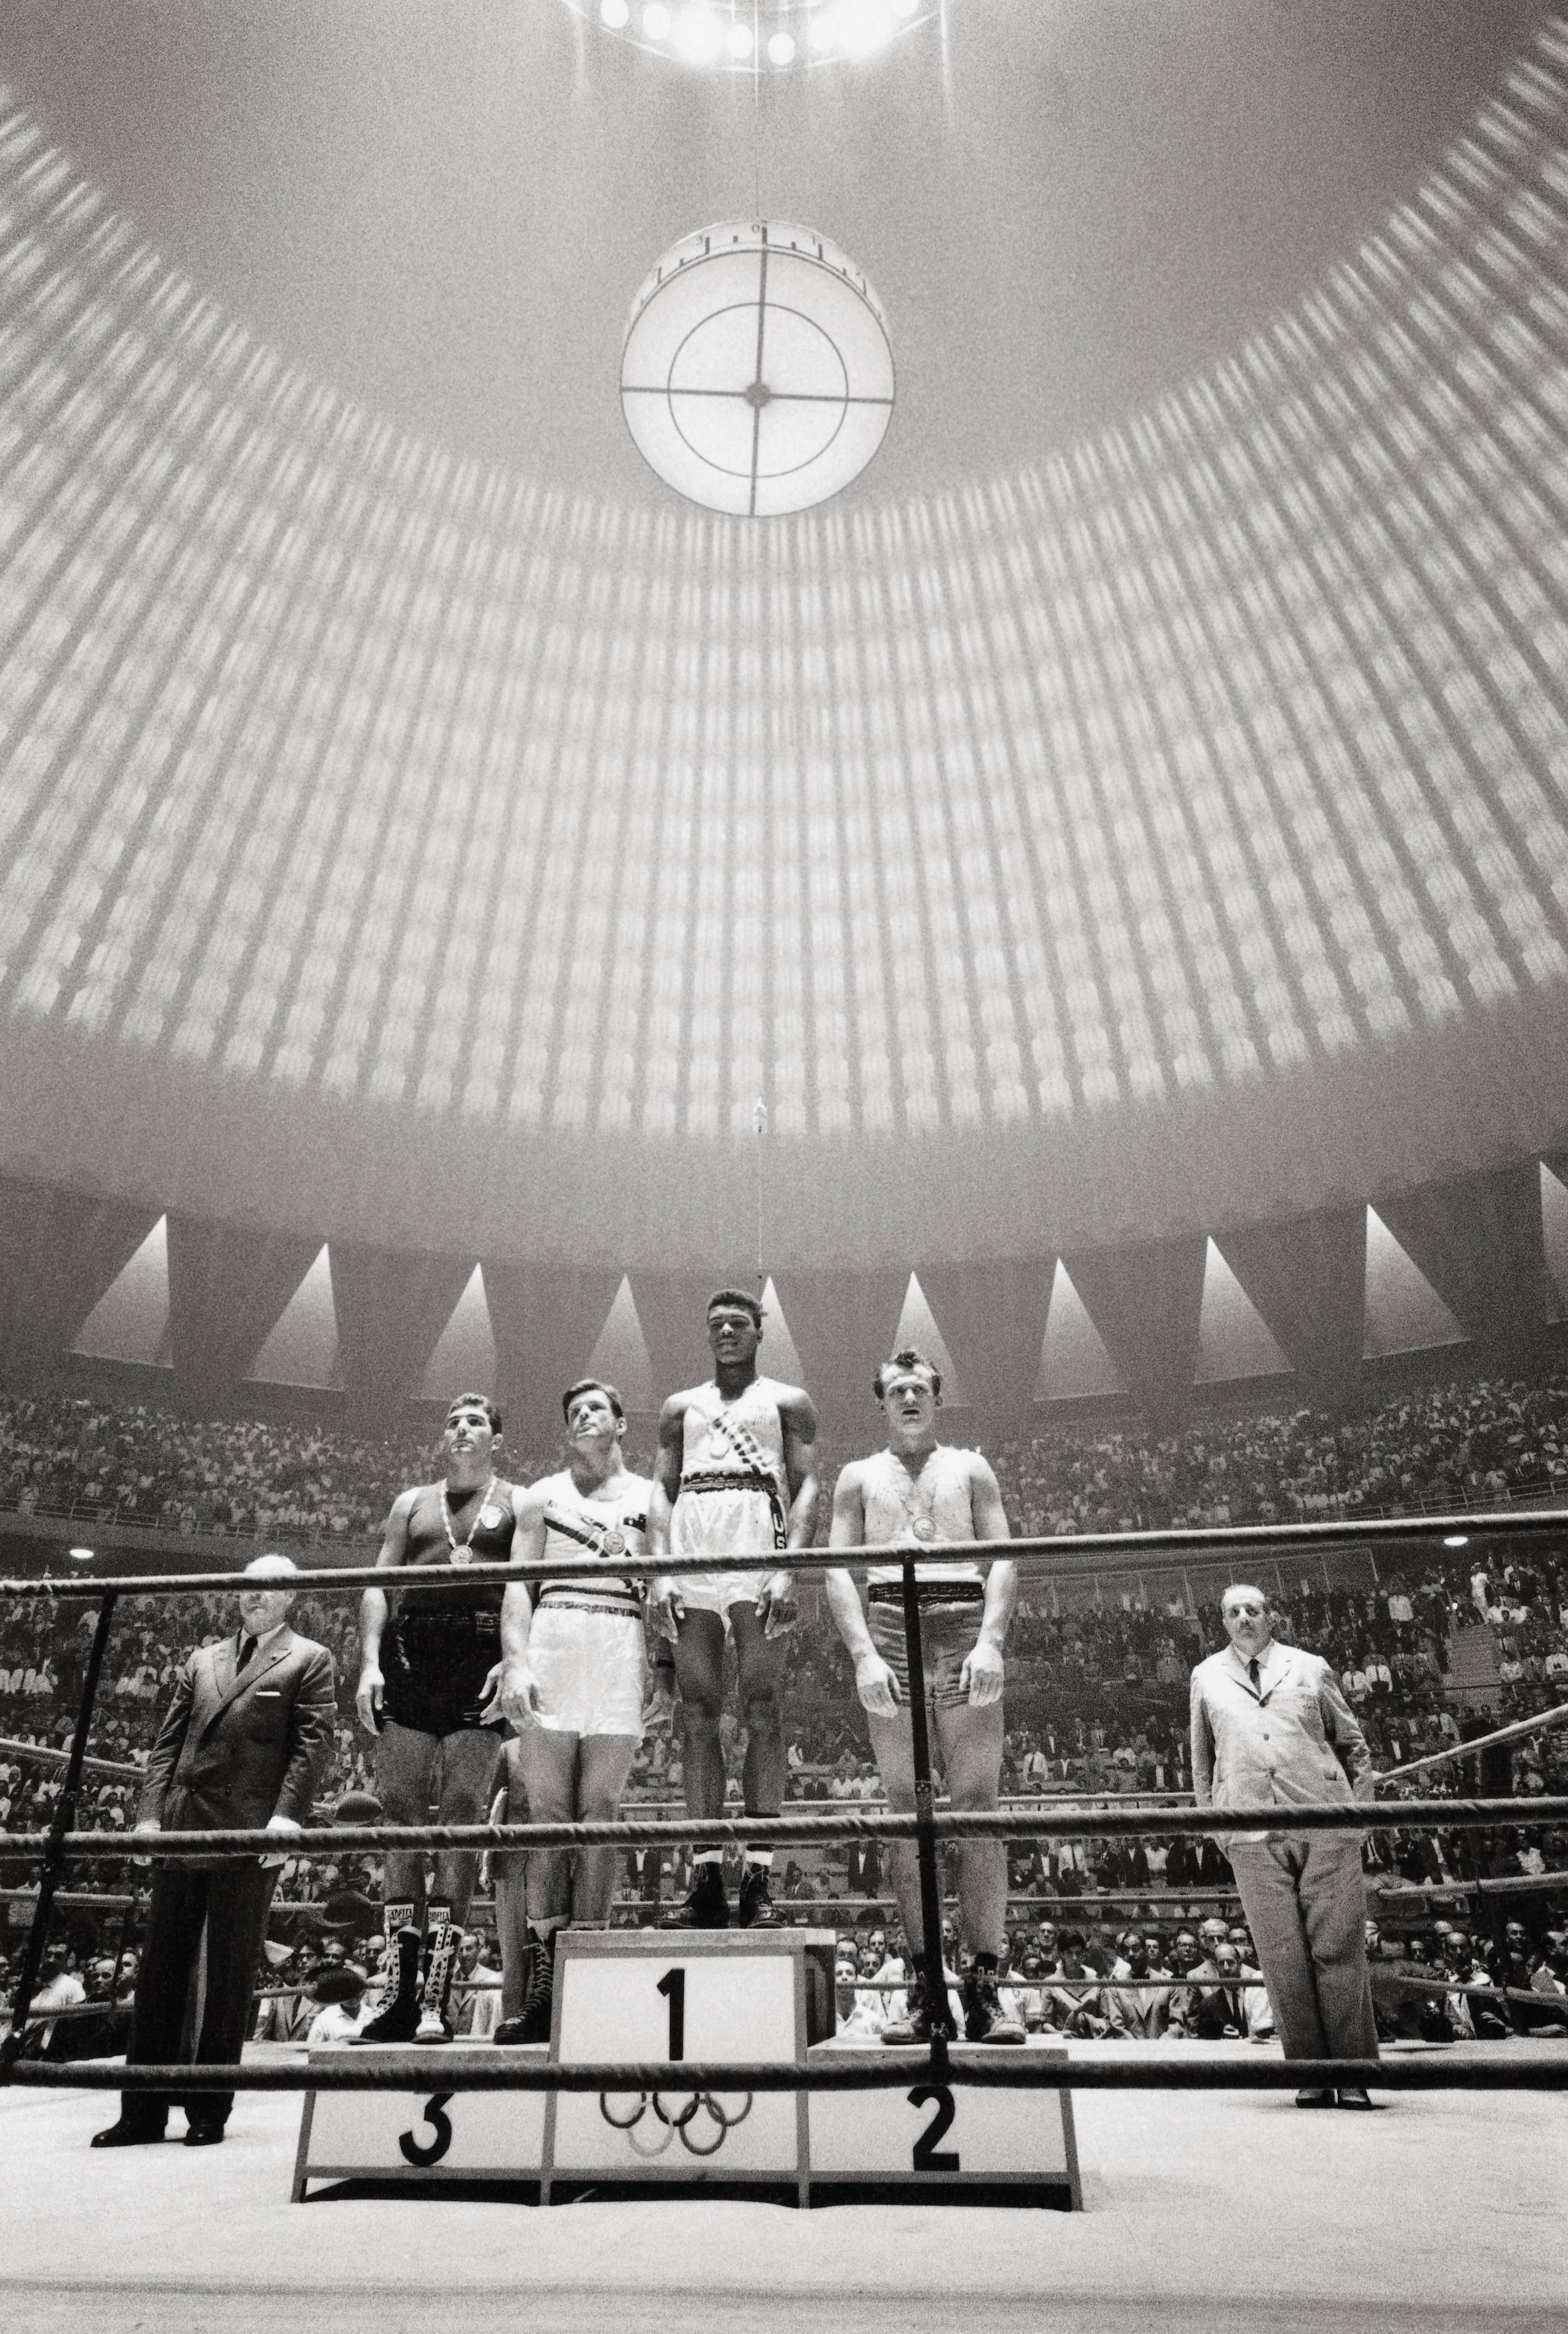 Marvin Newman Black and White Photograph - 1960 Rome Olympics, Cassius Clay